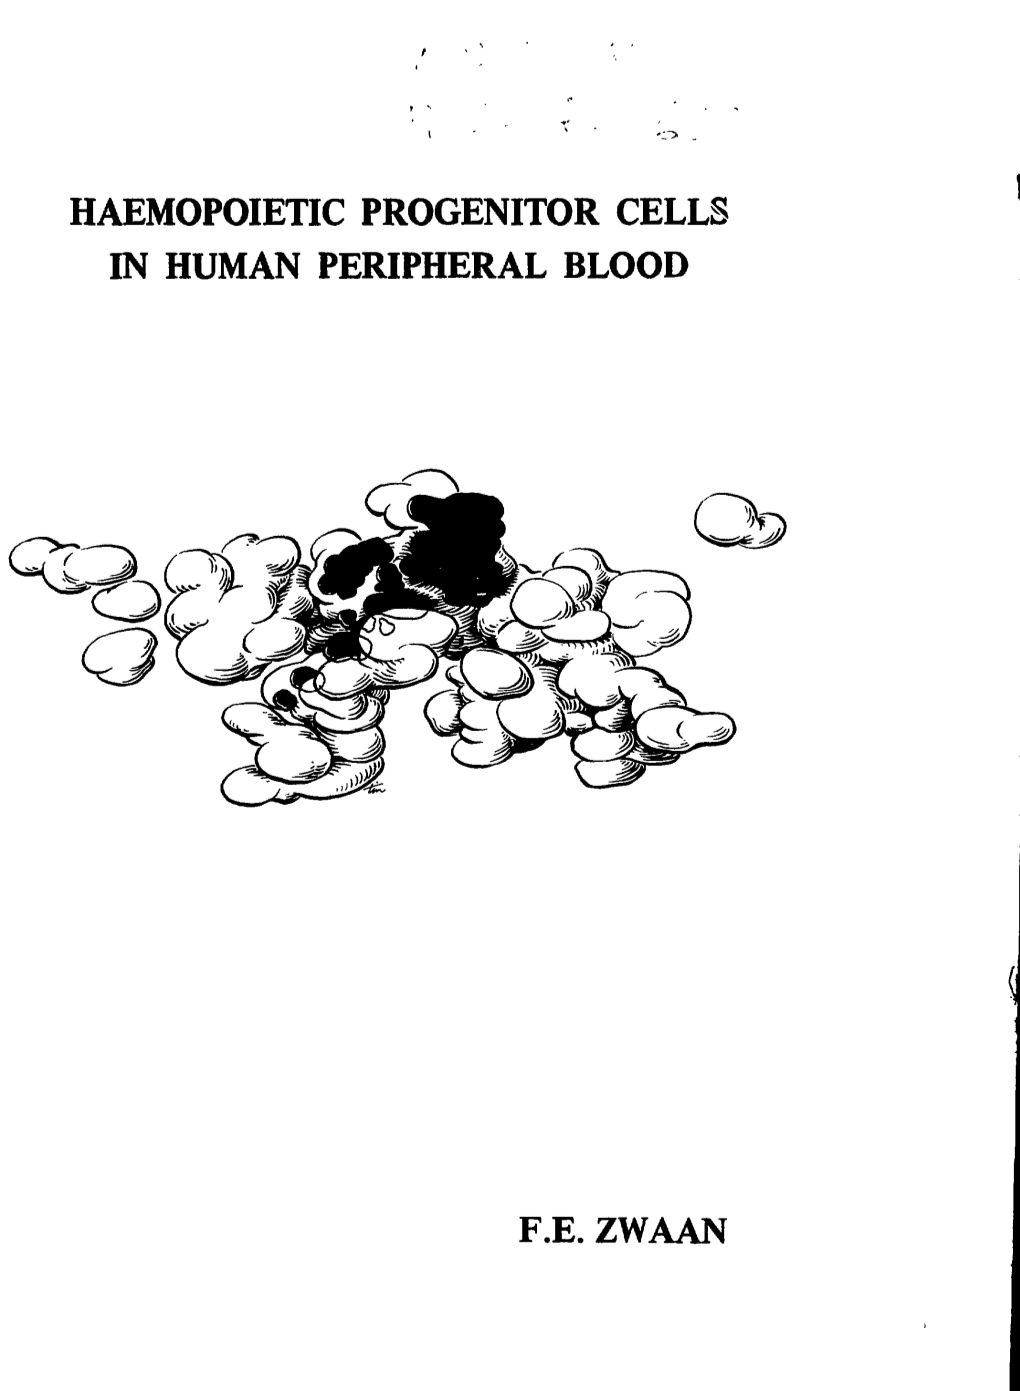 Haemopoietic Progenitor Cells in Human Peripheral Blood